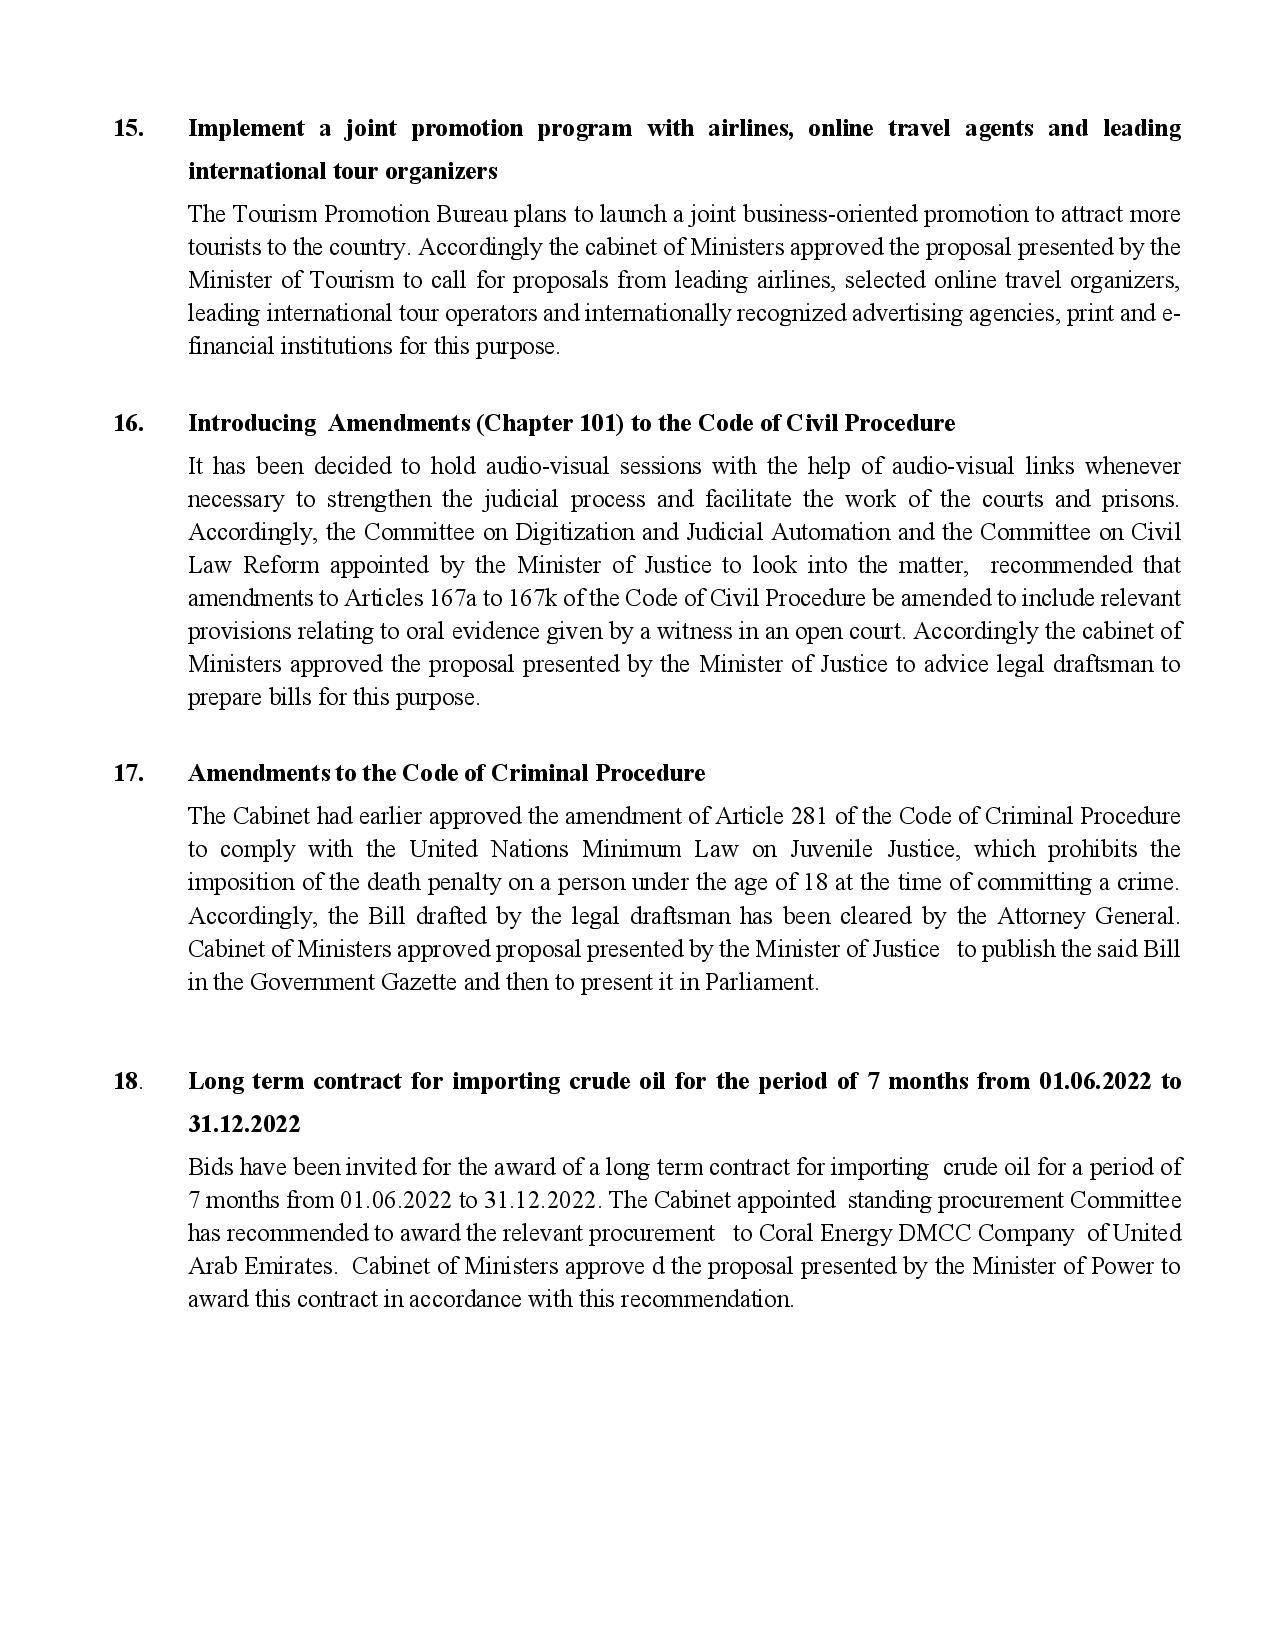 Cabinet Decision on 14.03.2022 English page 005